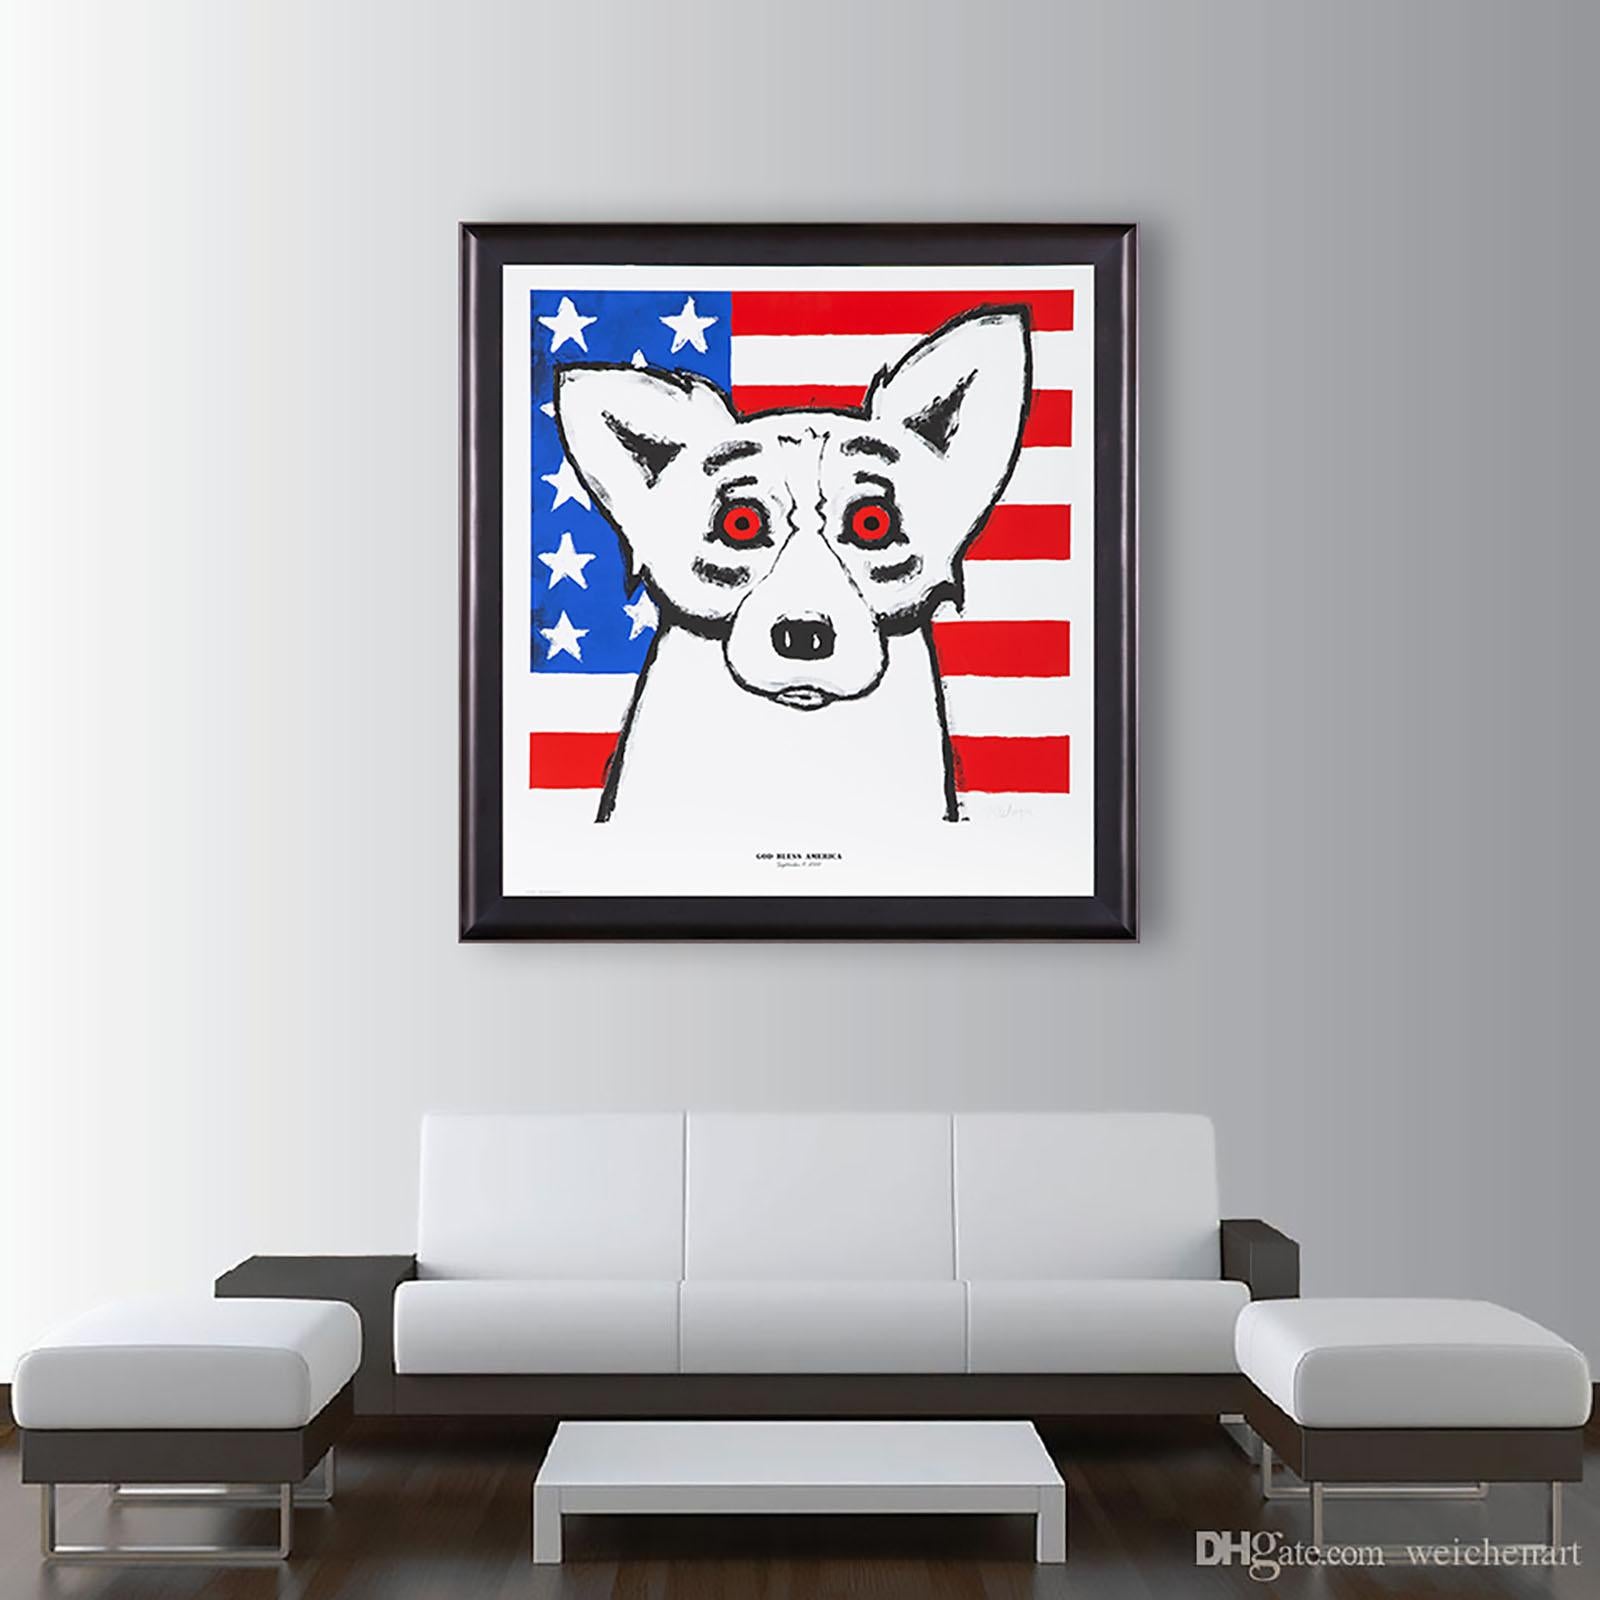 George Rodrigue God Bless America Sold Out Fundraising piece for 9/11 & Katrina For Sale 6